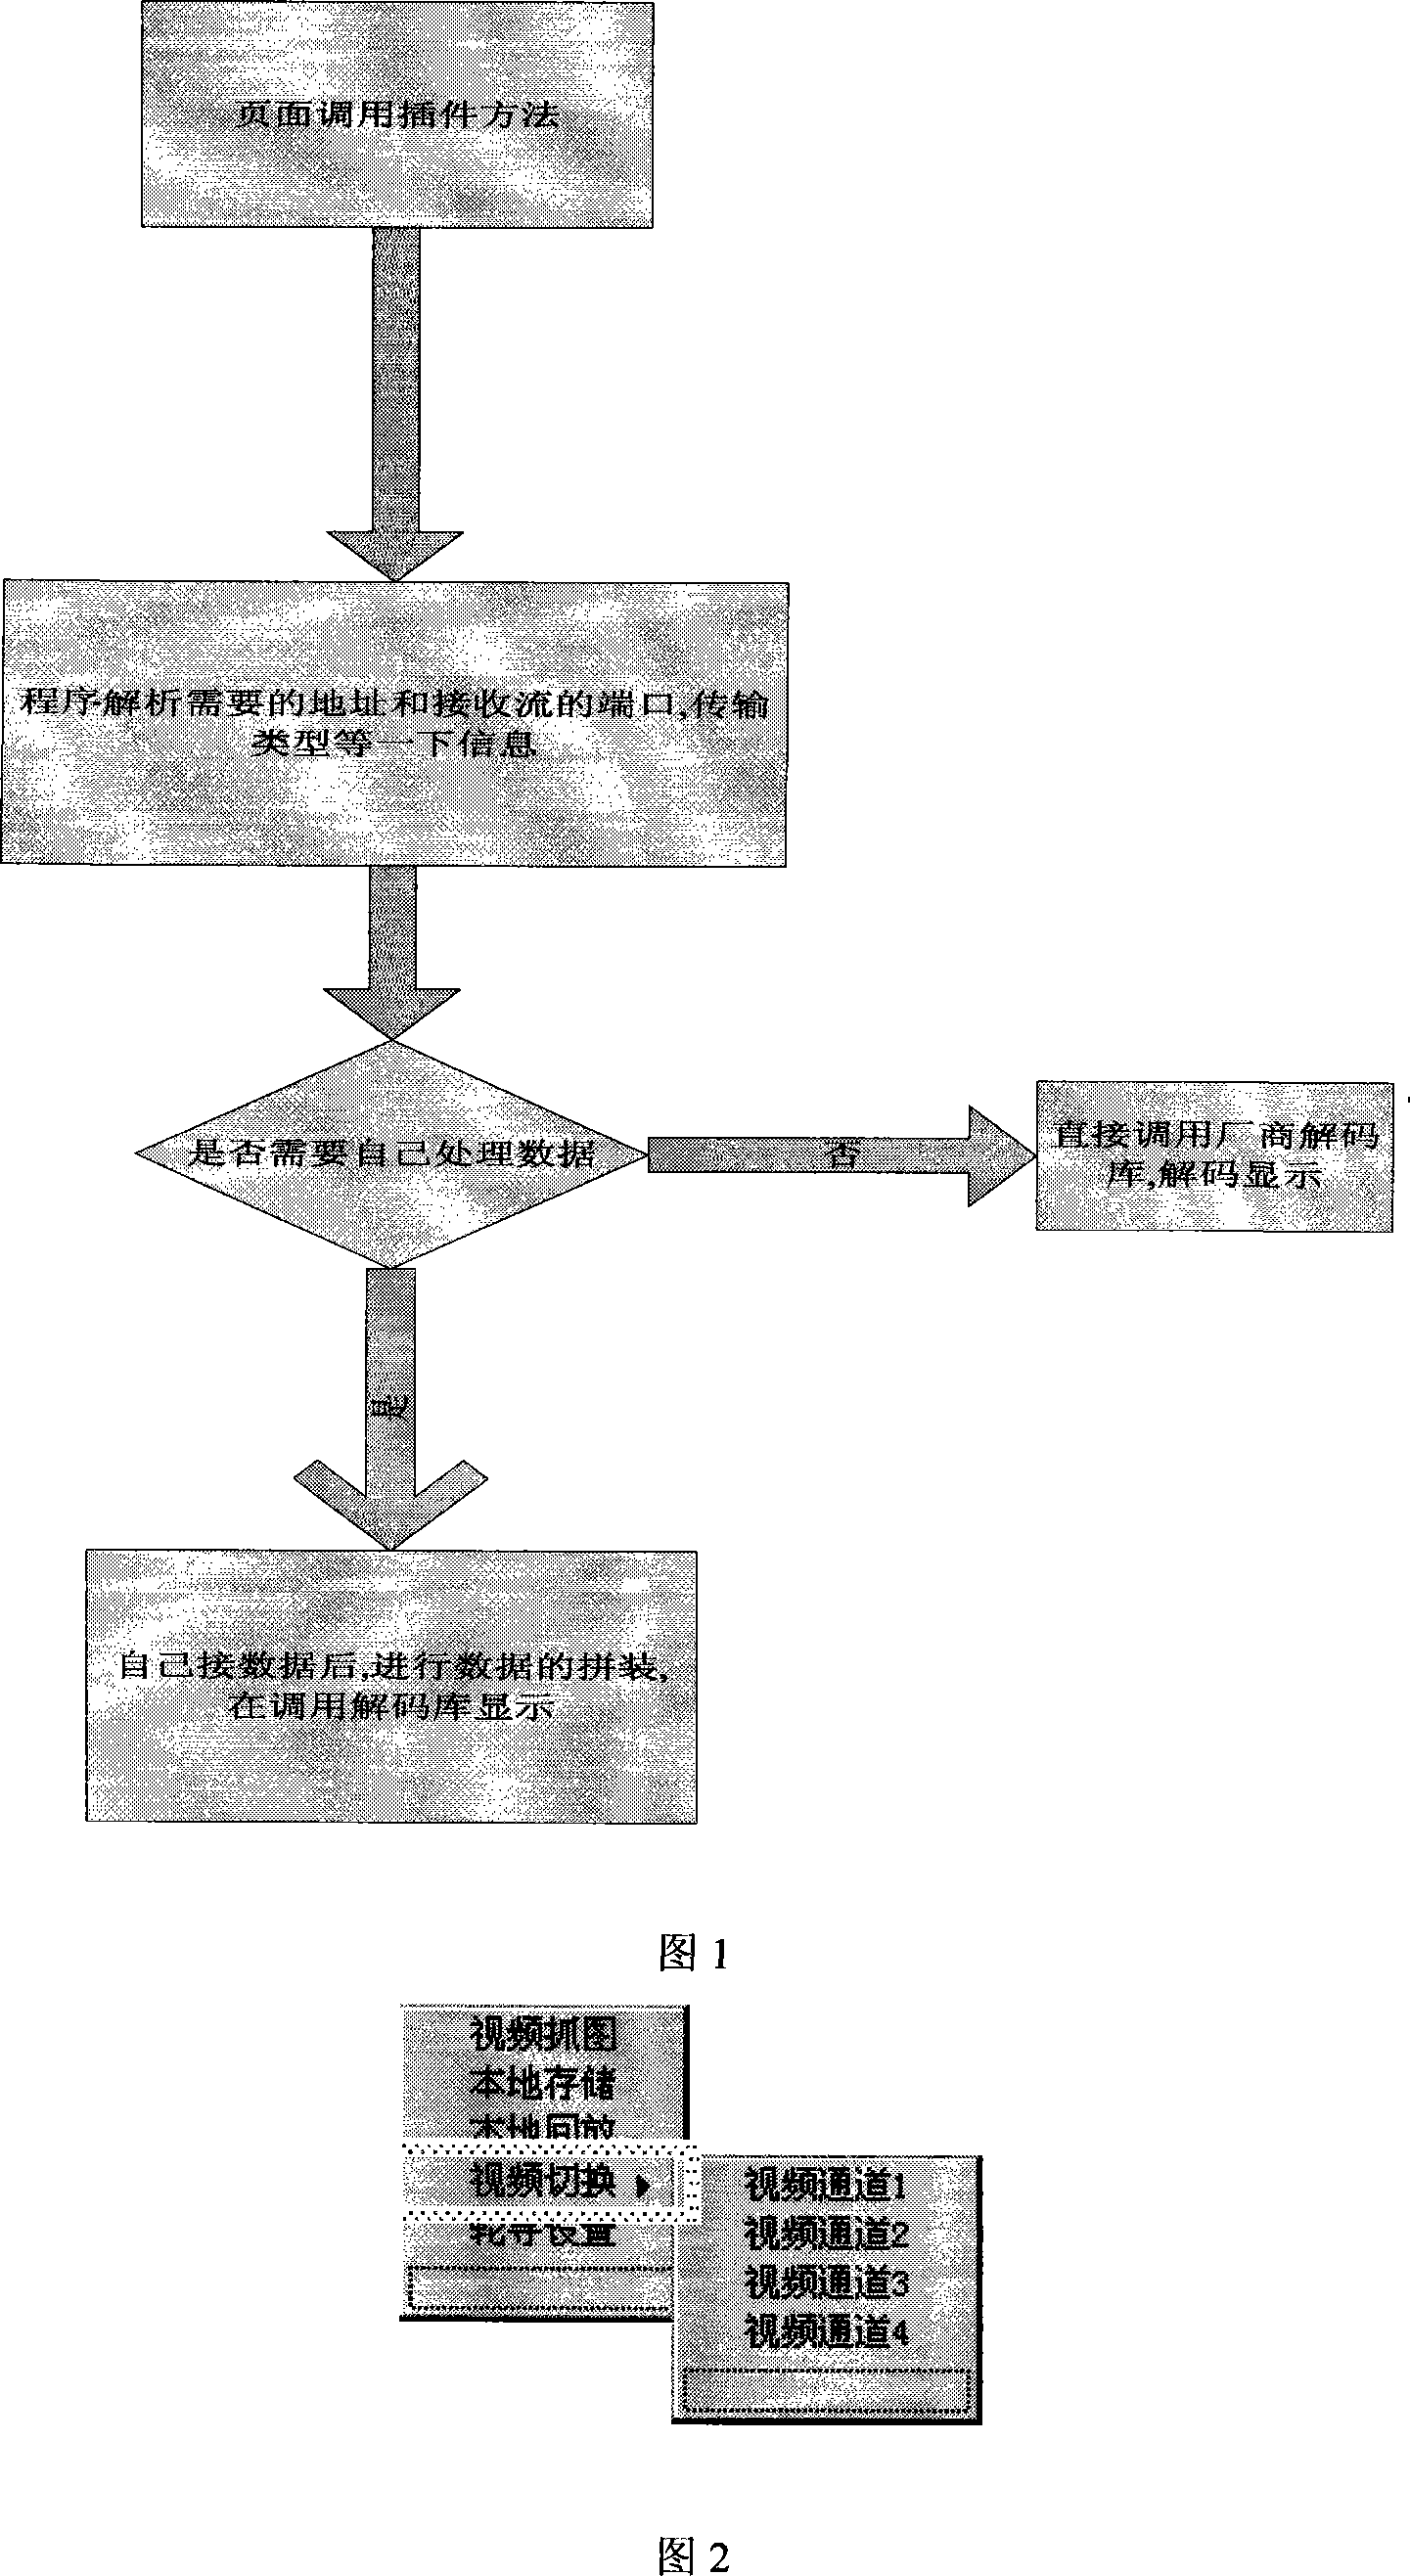 Method for dynamically loading communication plug-in unit in video monitoring system